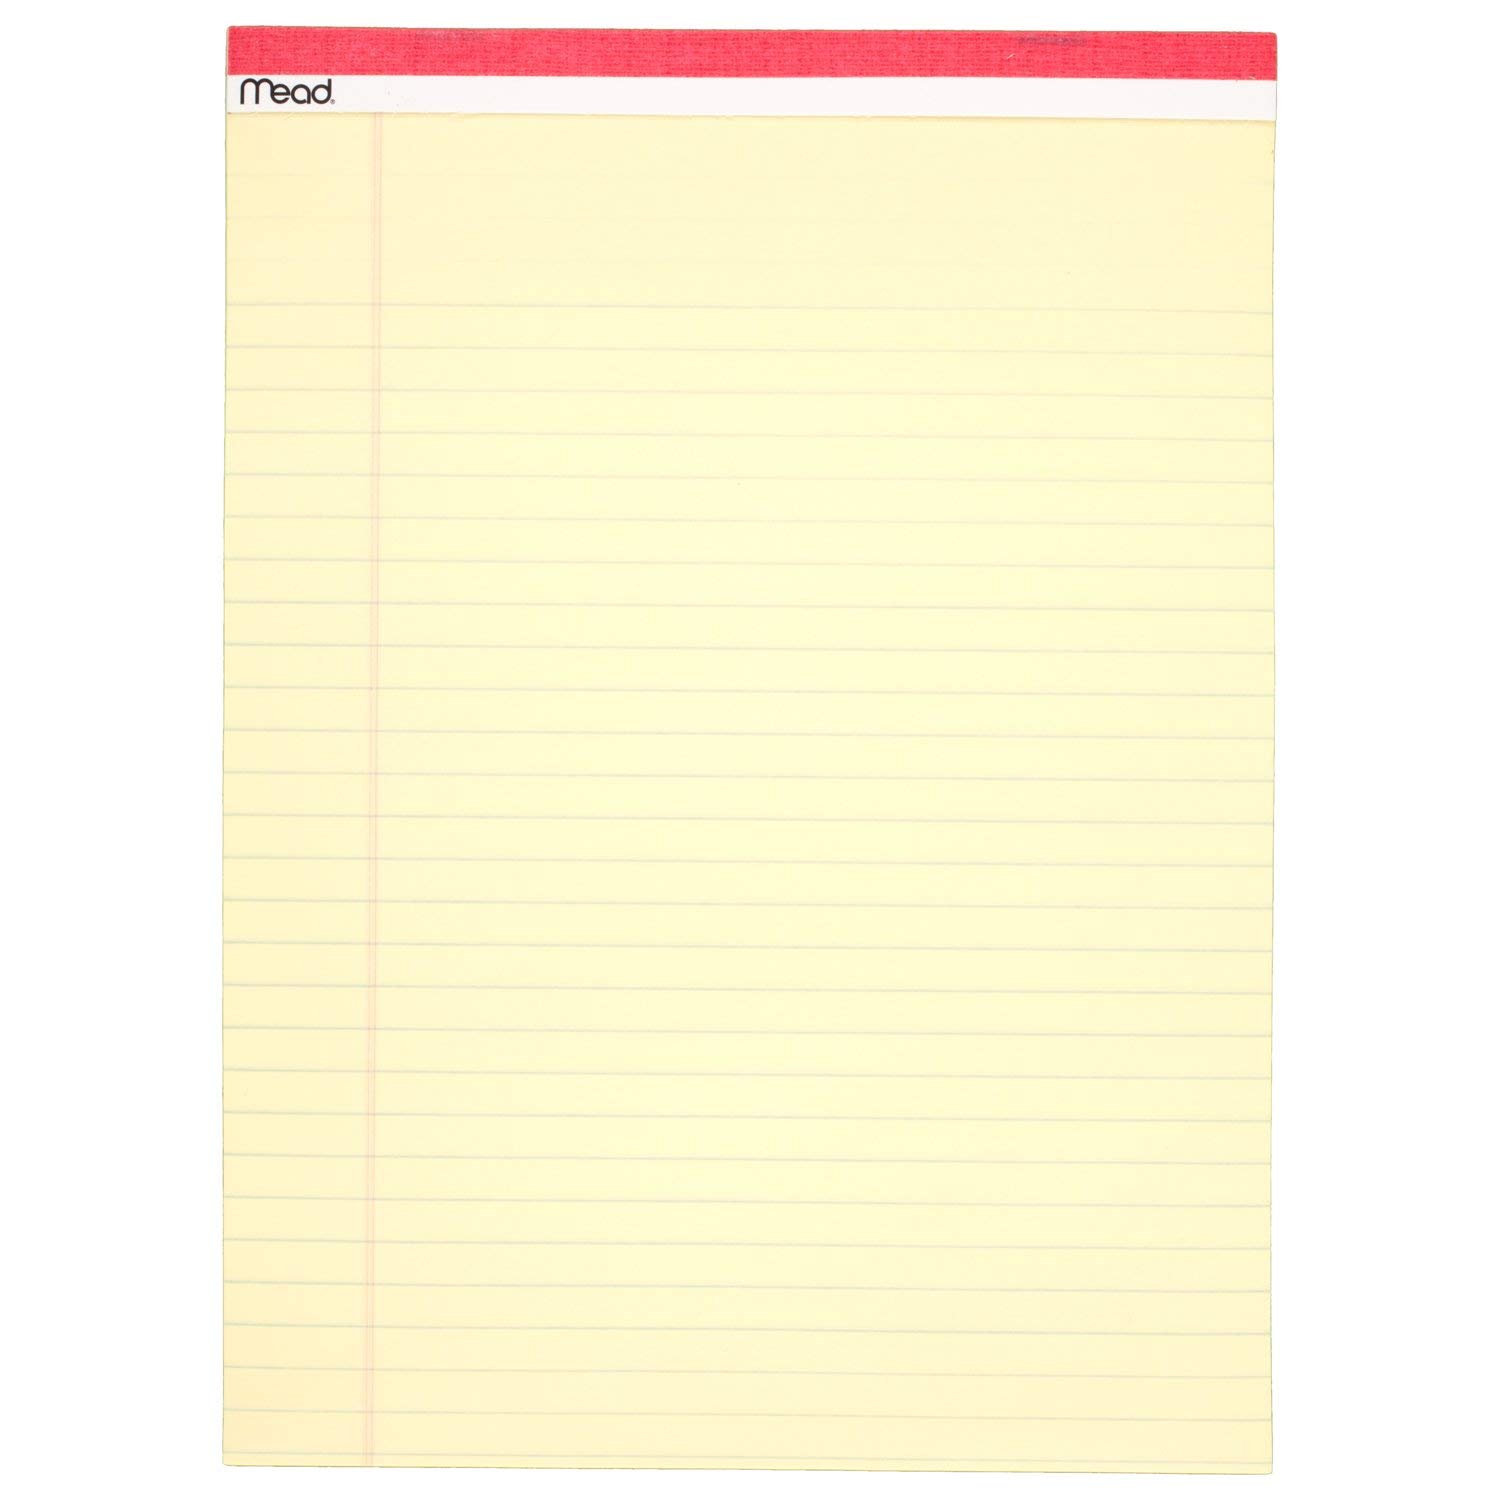 Legal/Wide Ruled 8-1/2 by 11-3/4 Legal Pad Canary 50 sheets per pad 12 pack USA 